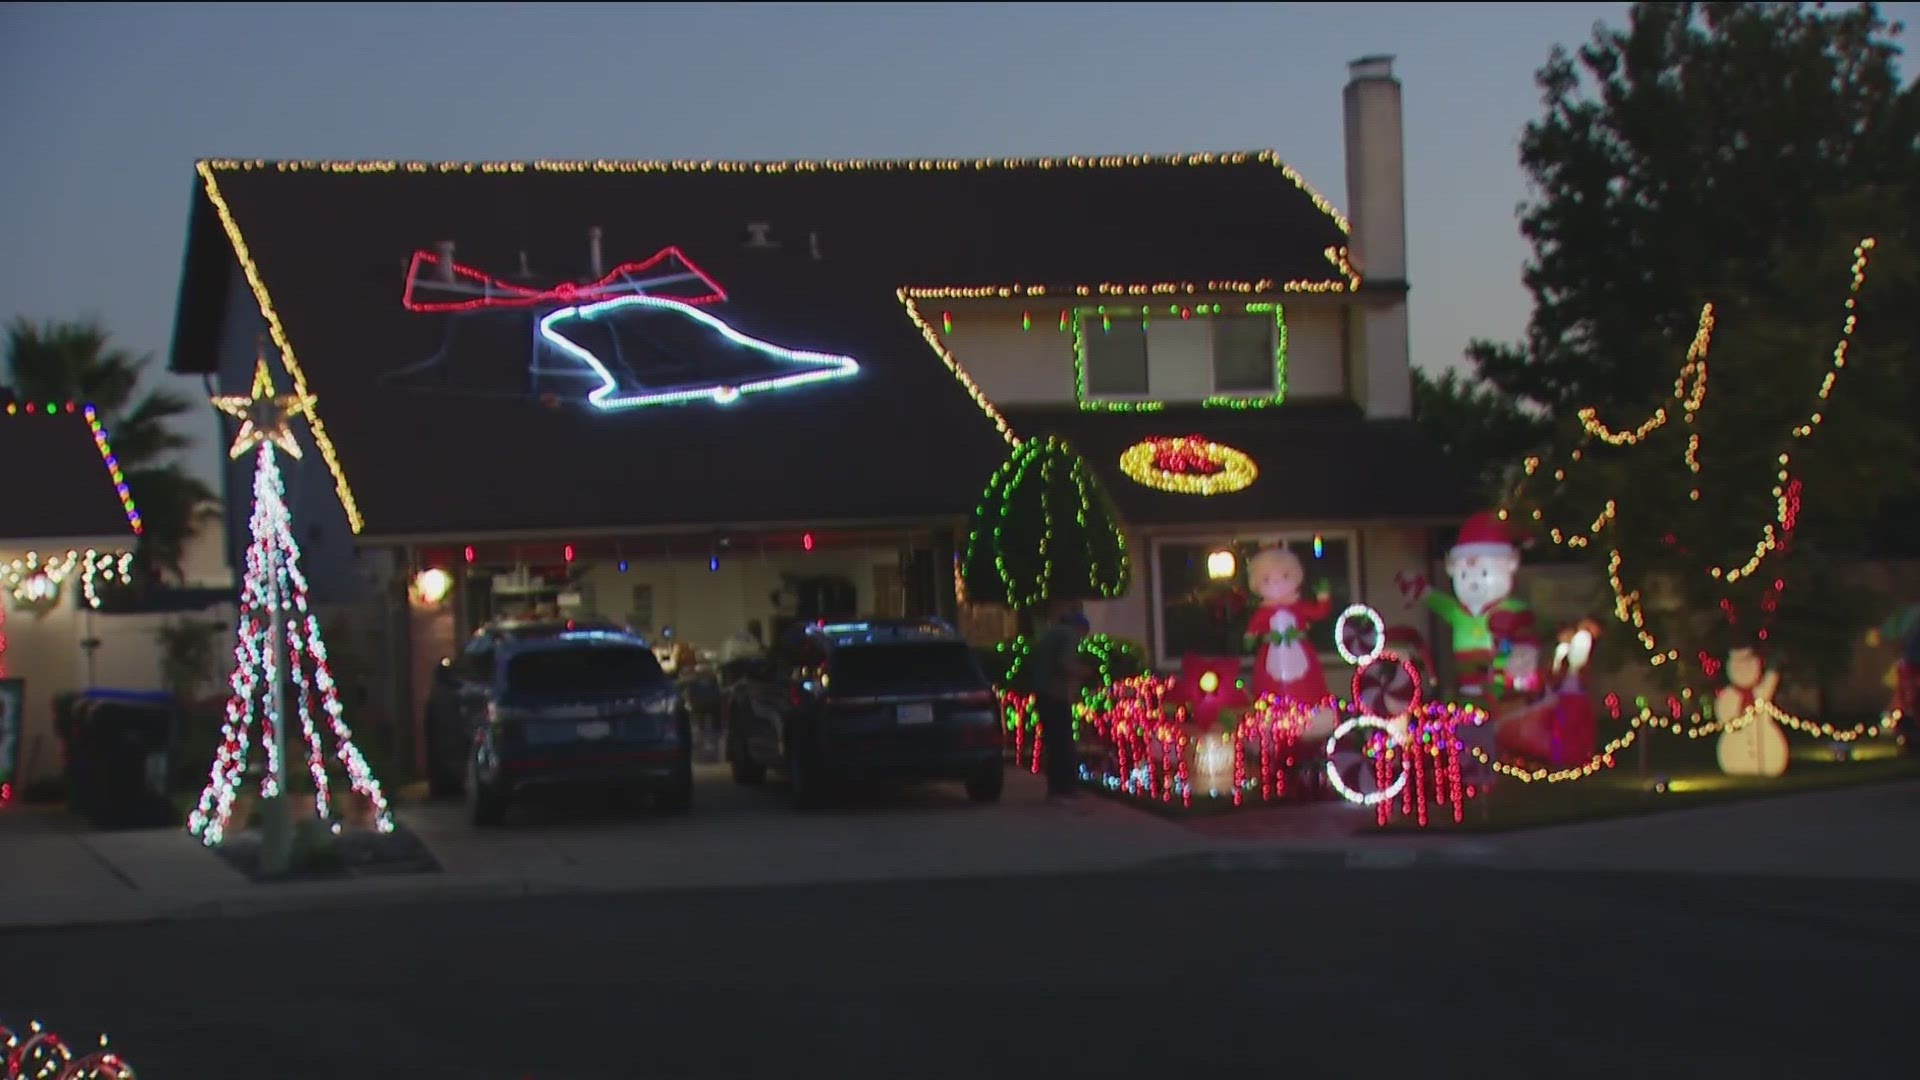 Extravagant holiday lighting displays are going up across San Diego County. But how much will it cost you?